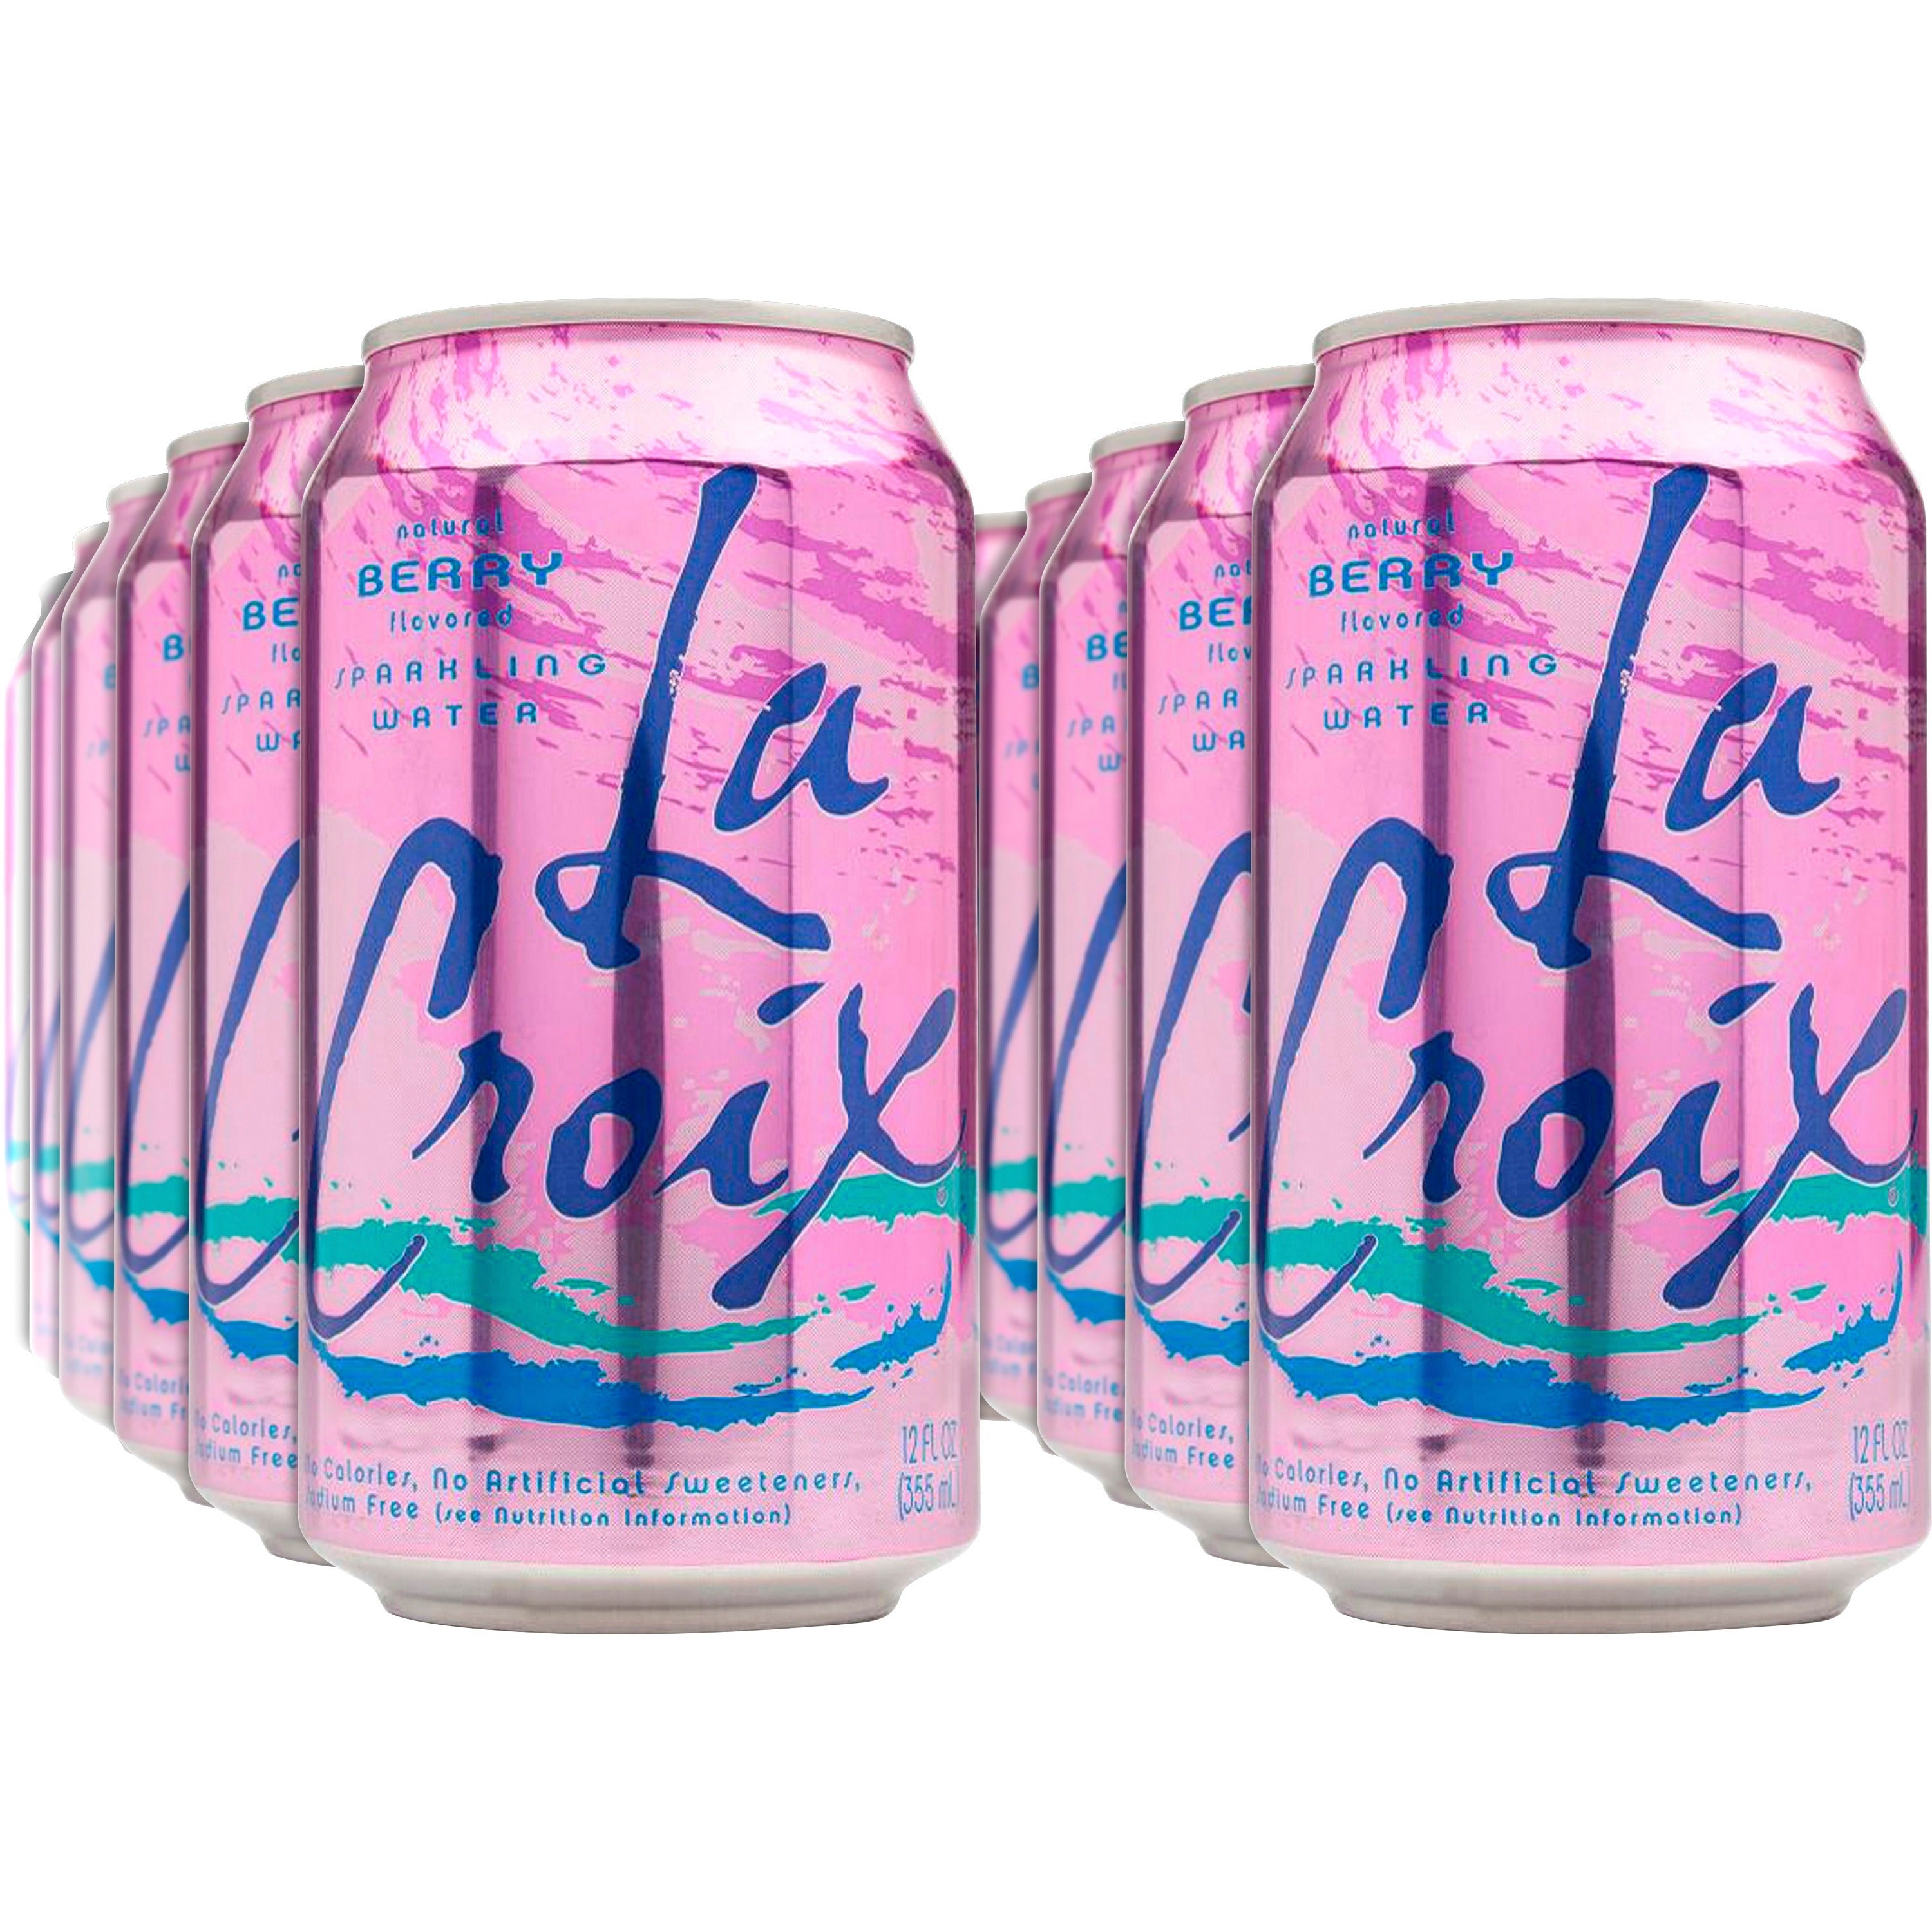 lacroix-berry-flavored-sparkling-water-ready-to-drink-12-fl-oz-355-ml-2-carton-12-pack_lcx40156 - 1